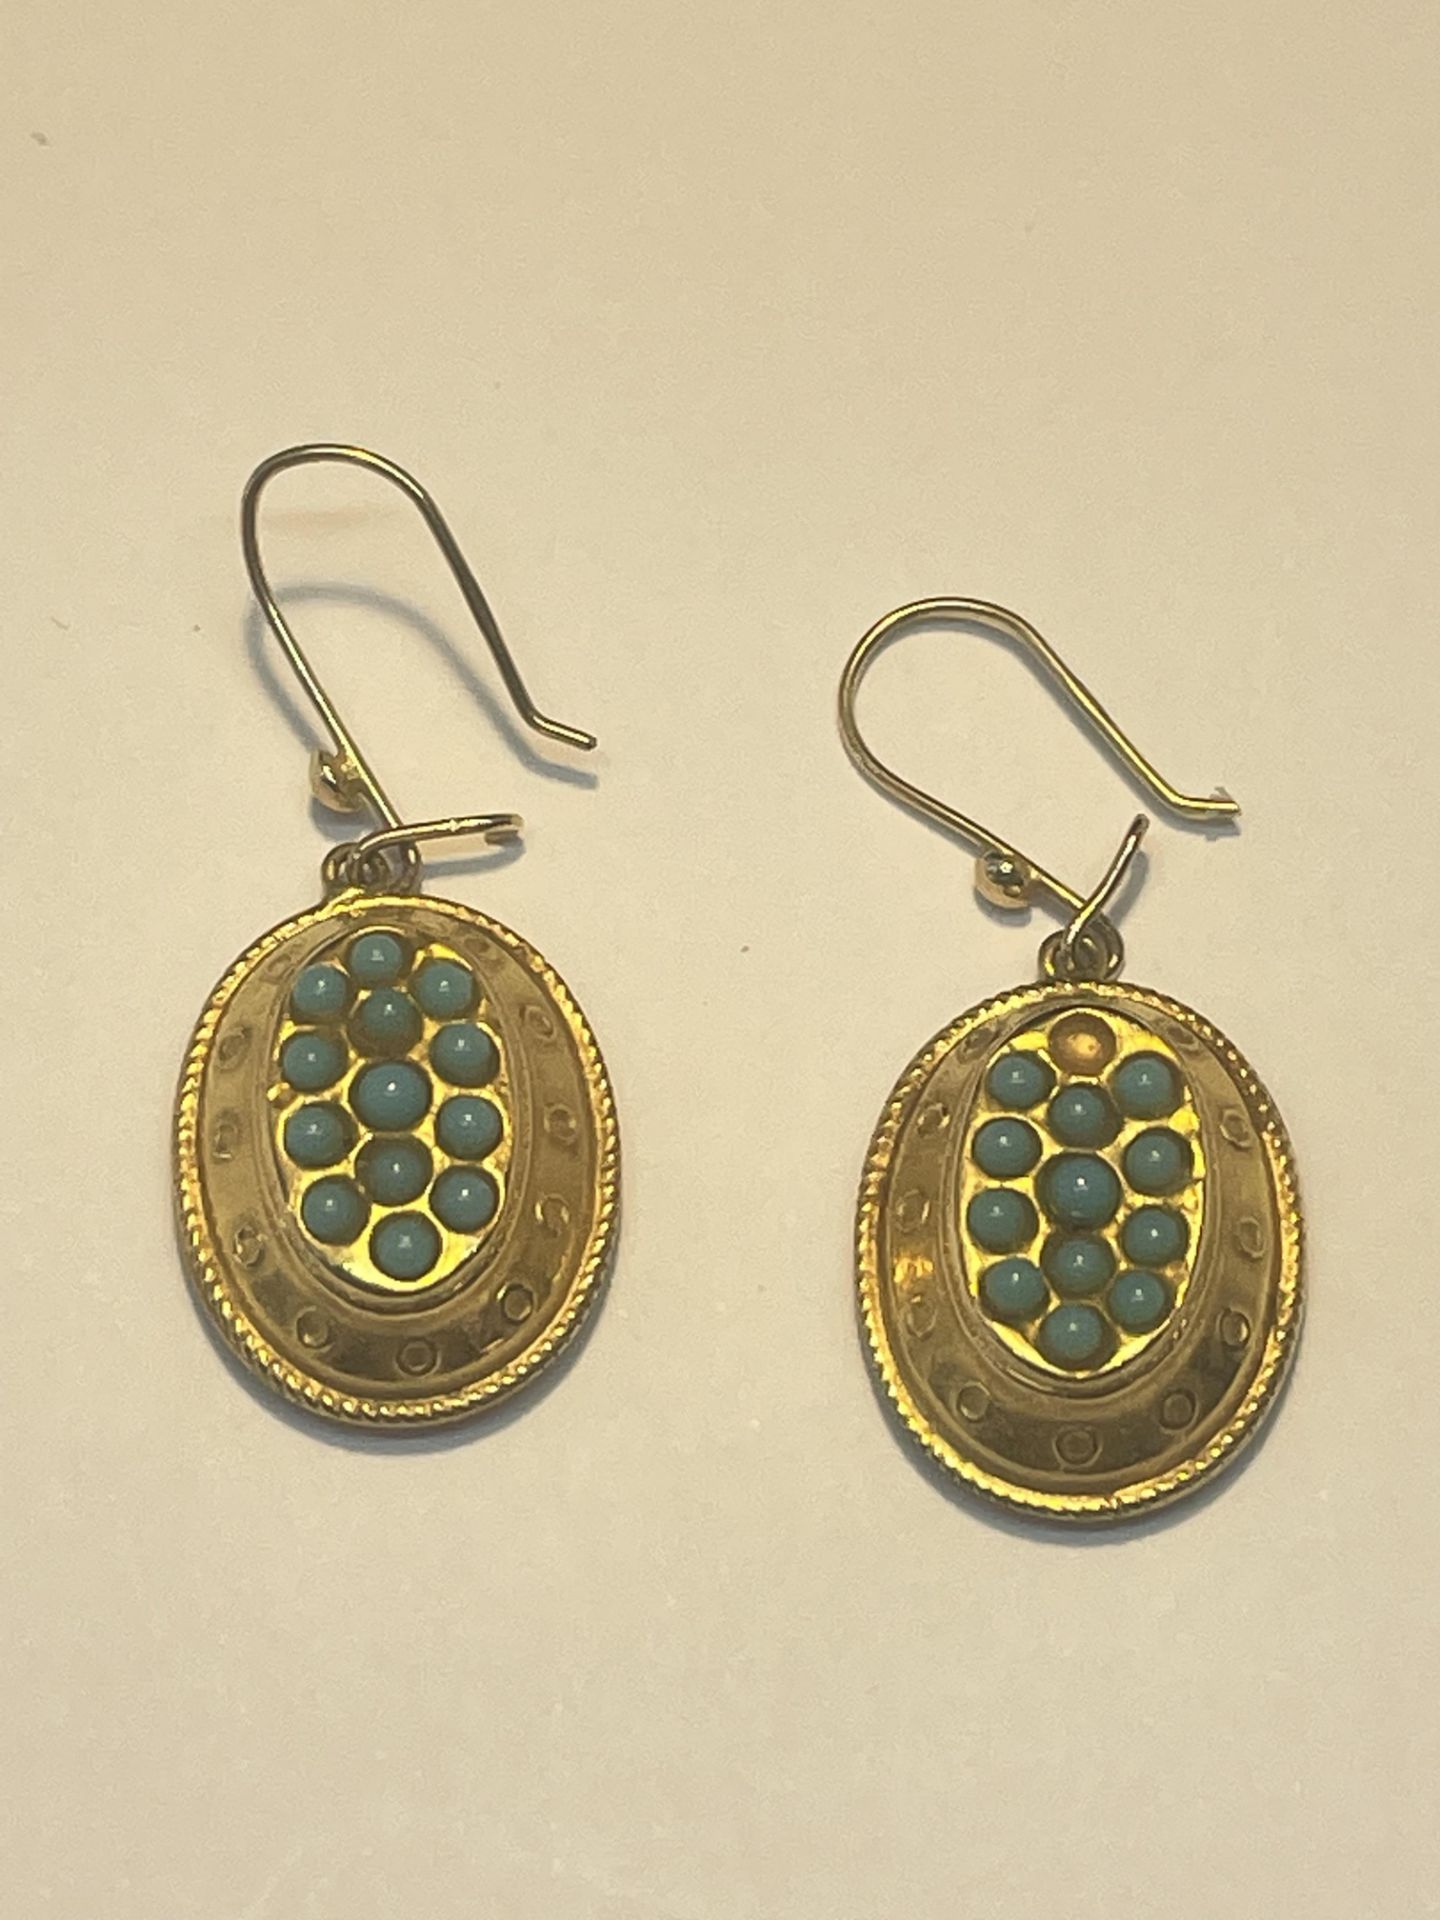 A PAIR OF 9 CARAT GOLD AND TURQUOISE STONE EARRINGS GROSS WEIGHT 2.19 GRAMS IN A PRESENTATION BOX